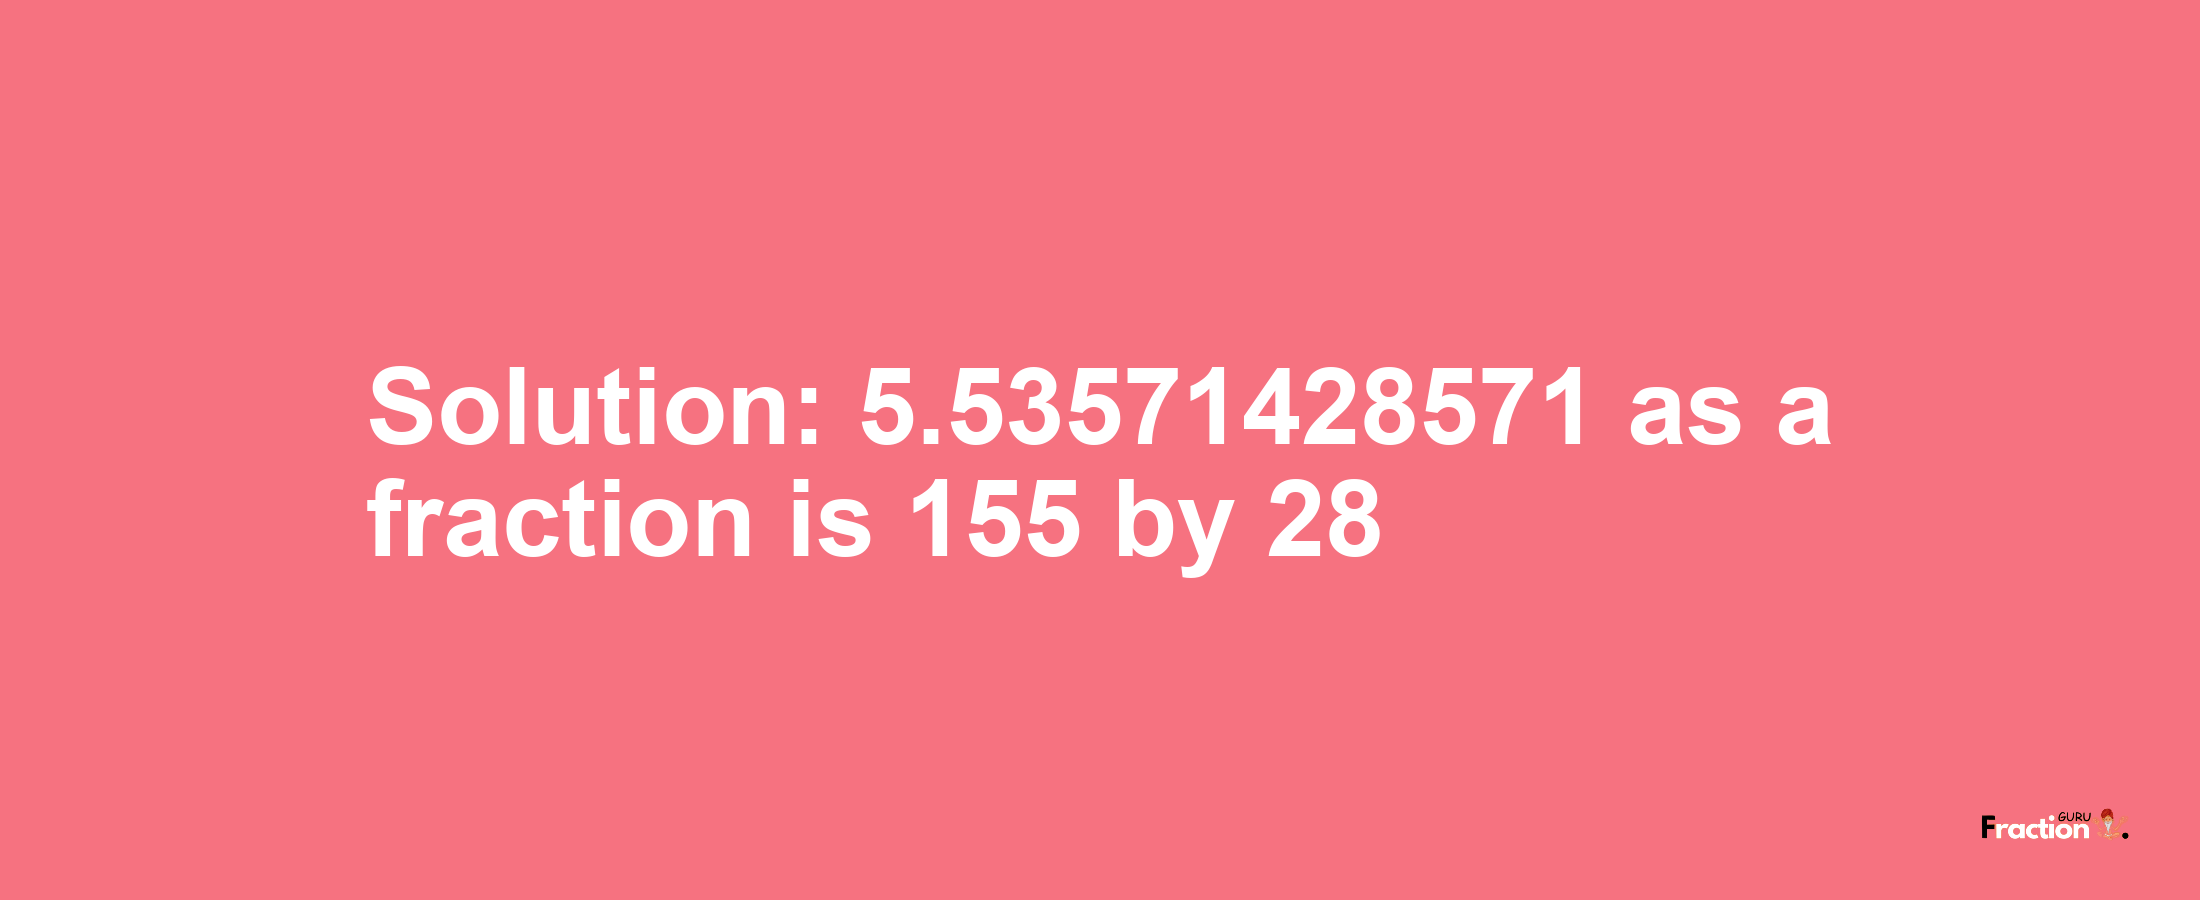 Solution:5.53571428571 as a fraction is 155/28